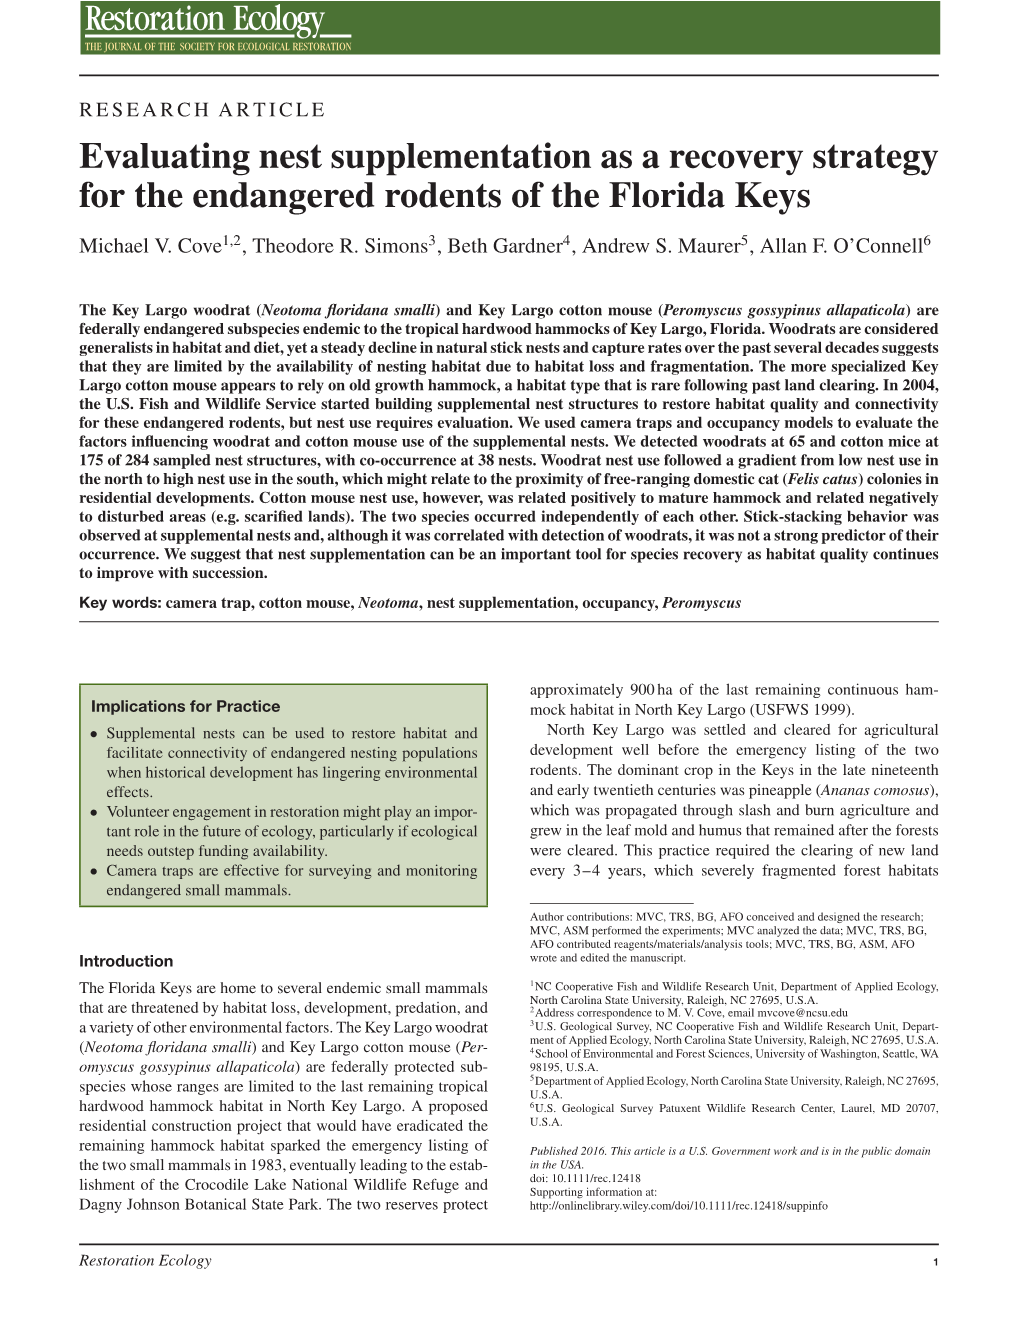 Evaluating Nest Supplementation As a Recovery Strategy for the Endangered Rodents of the Florida Keys Michael V